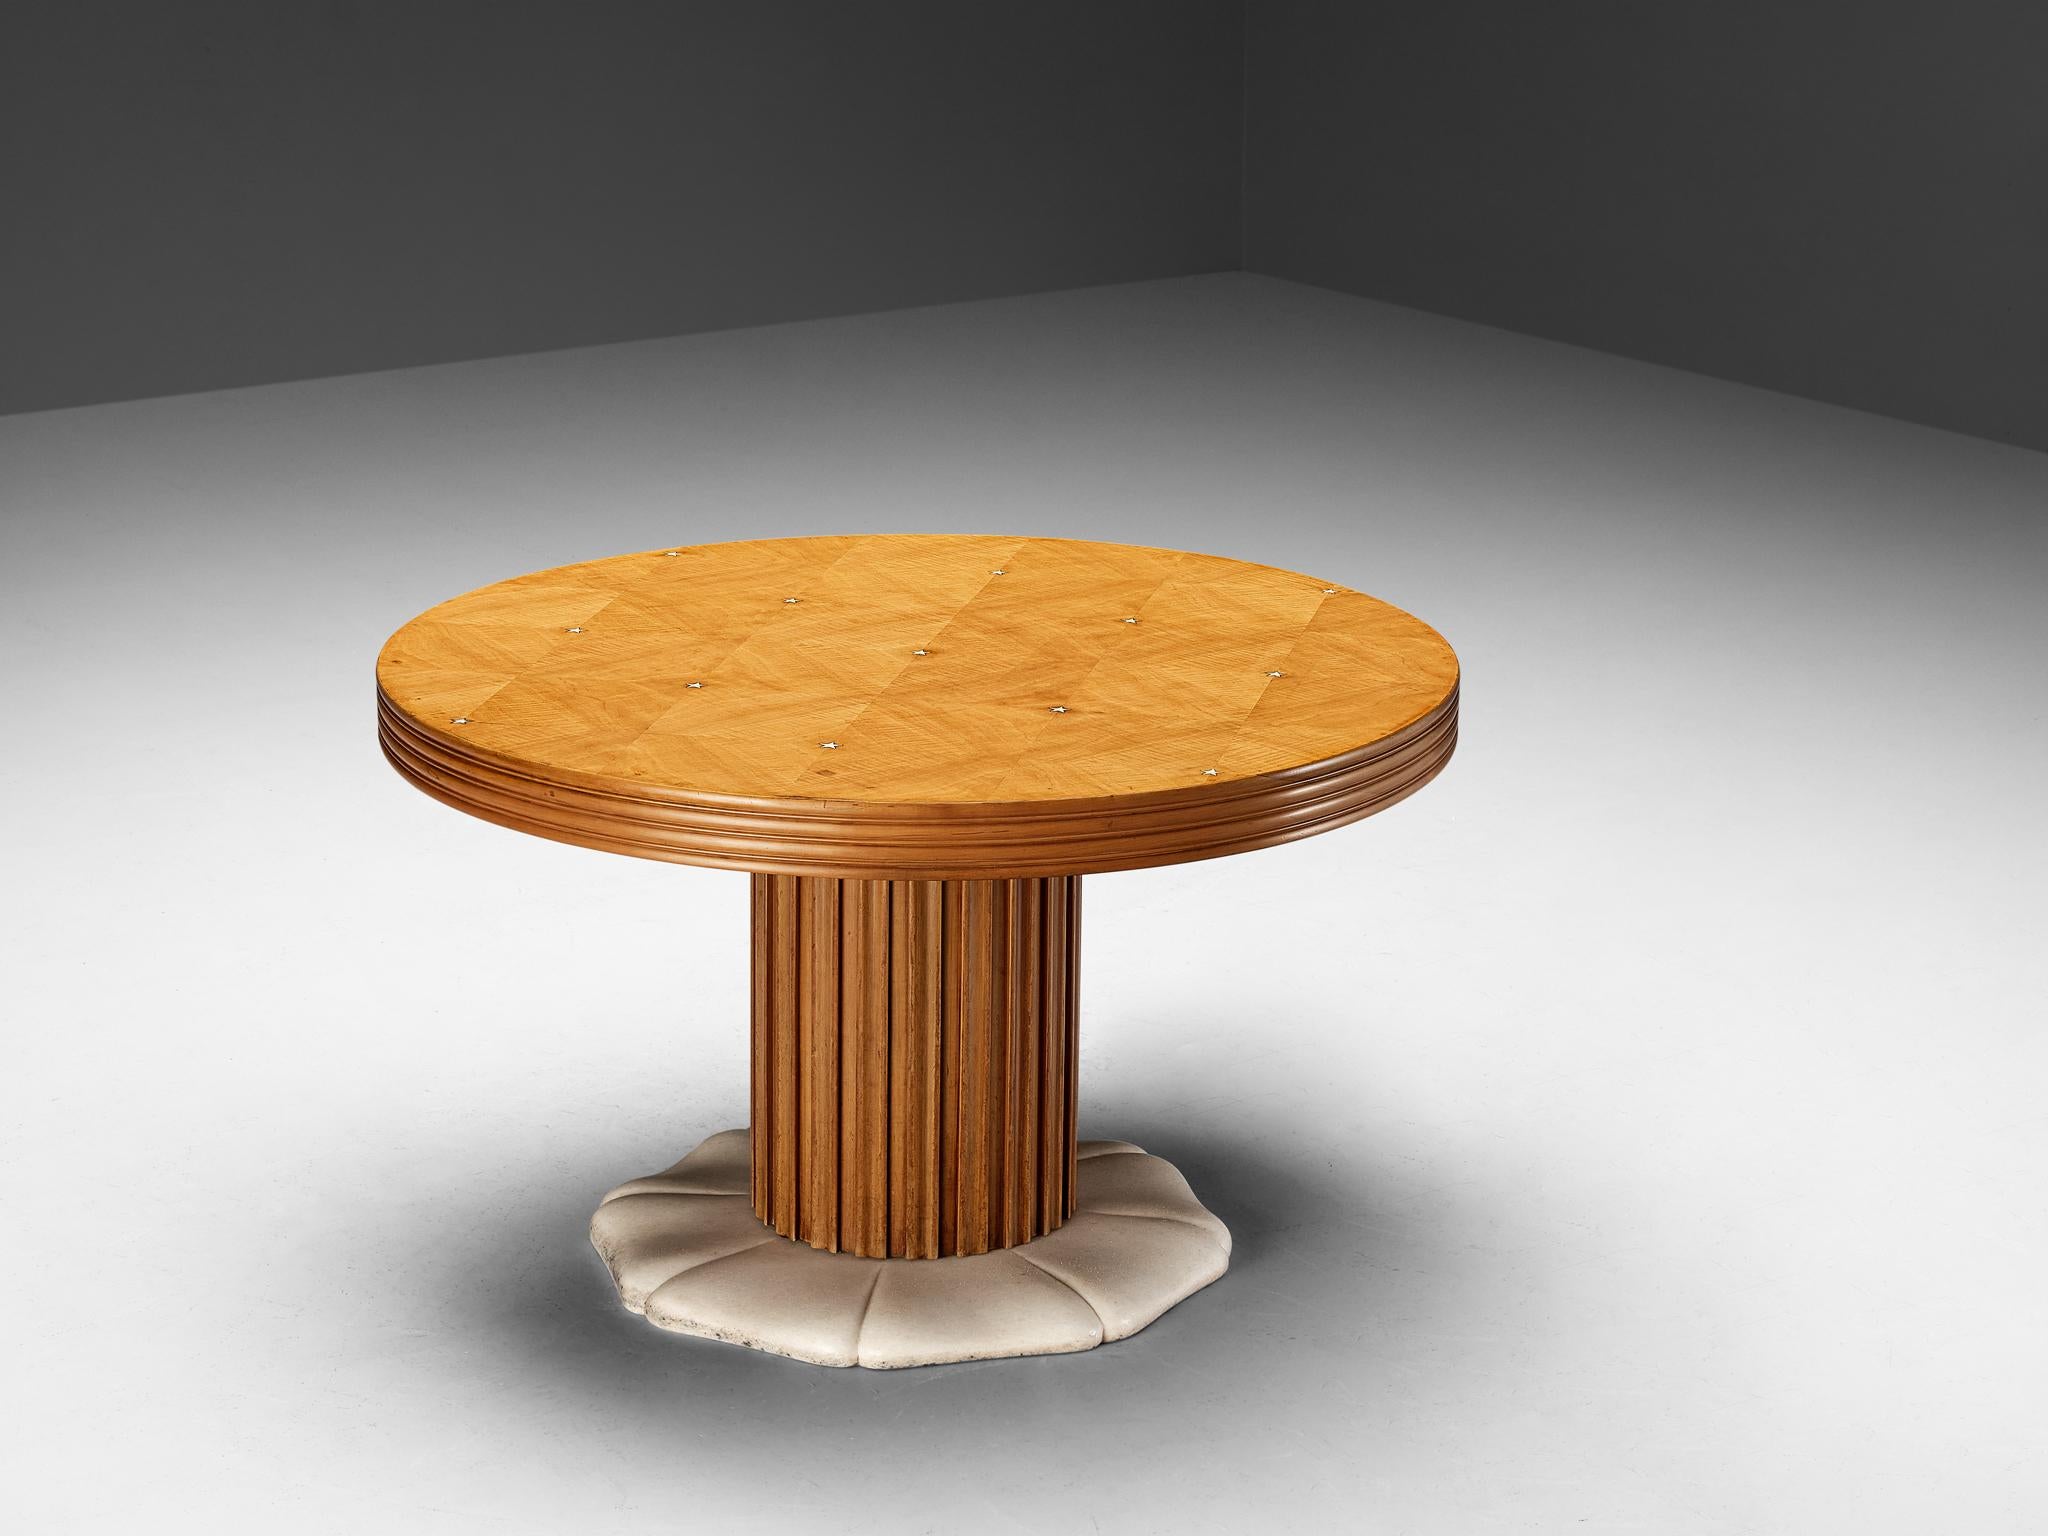 Paolo Buffa round table, brass, marble, cherry wood, Italy, circa 1940

A magnificent piece of furniture designed by Paolo Buffa. This table is made around 1940 and shows wonderful design on many fronts. To start at the top, this table is executed